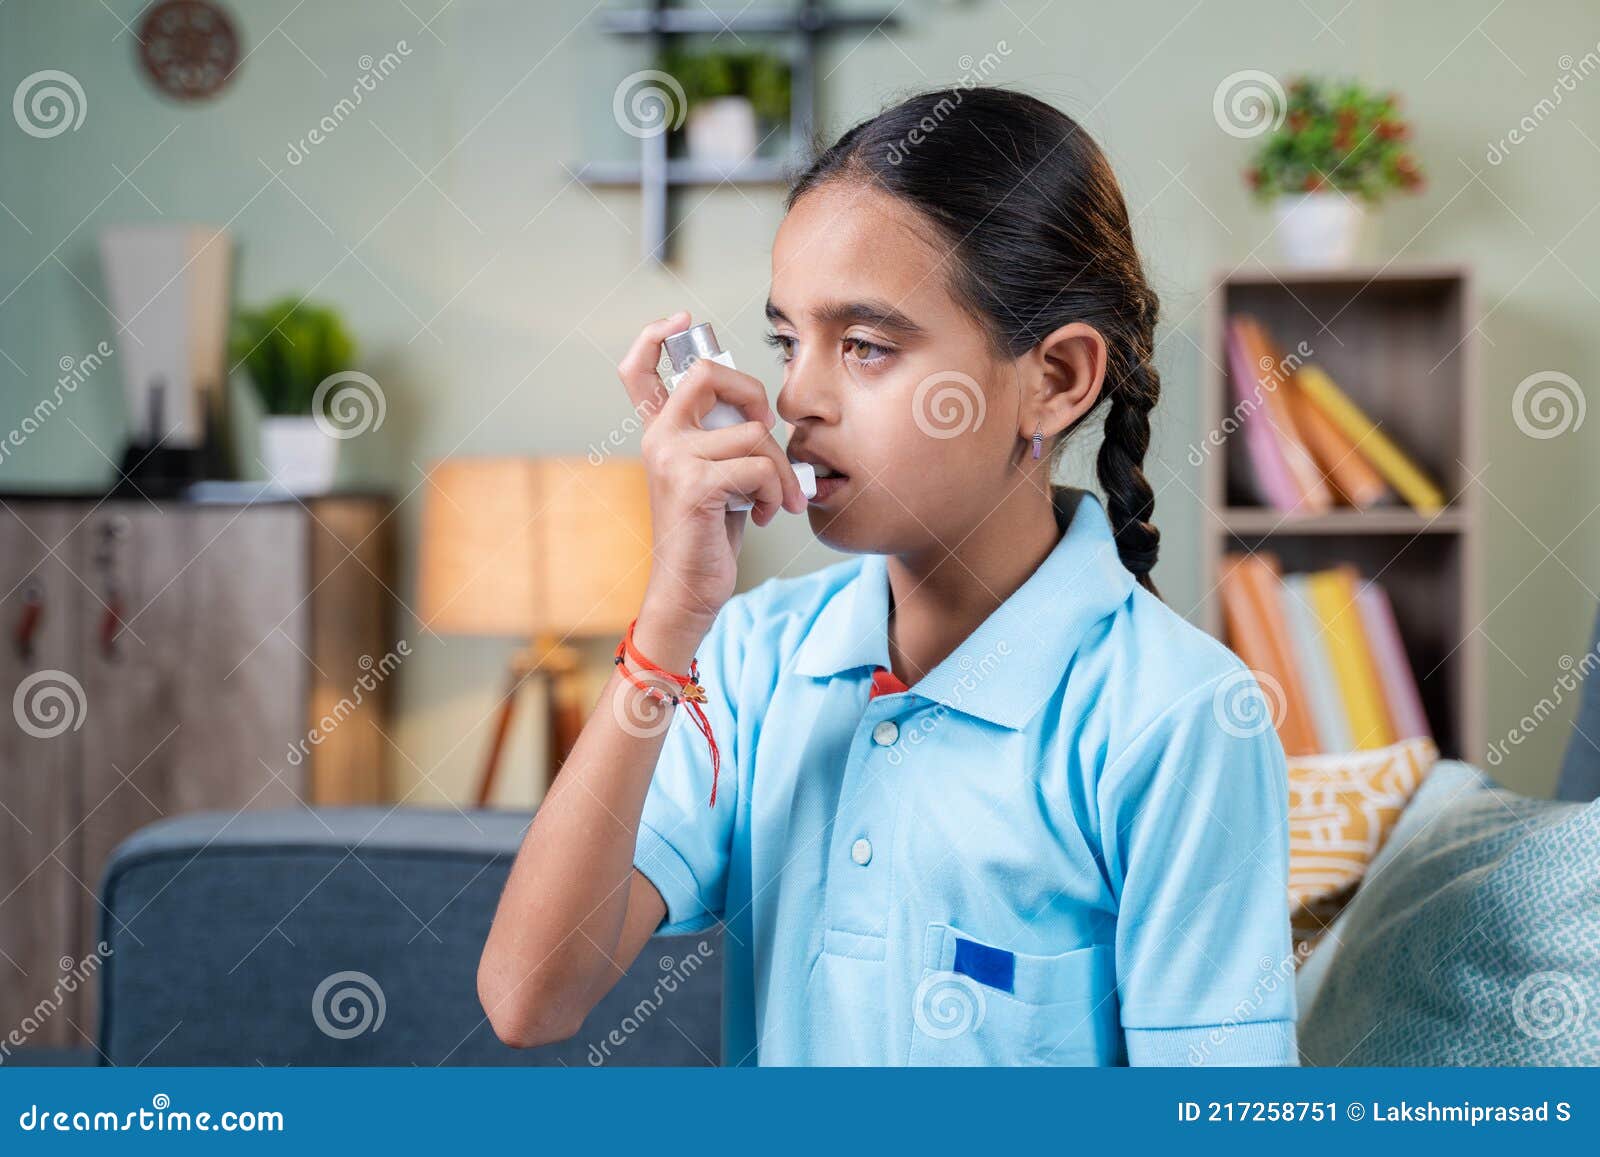 side view young girl kid using asthma medication inhaler after taking deep breath - concept of asthmatic teenager kids